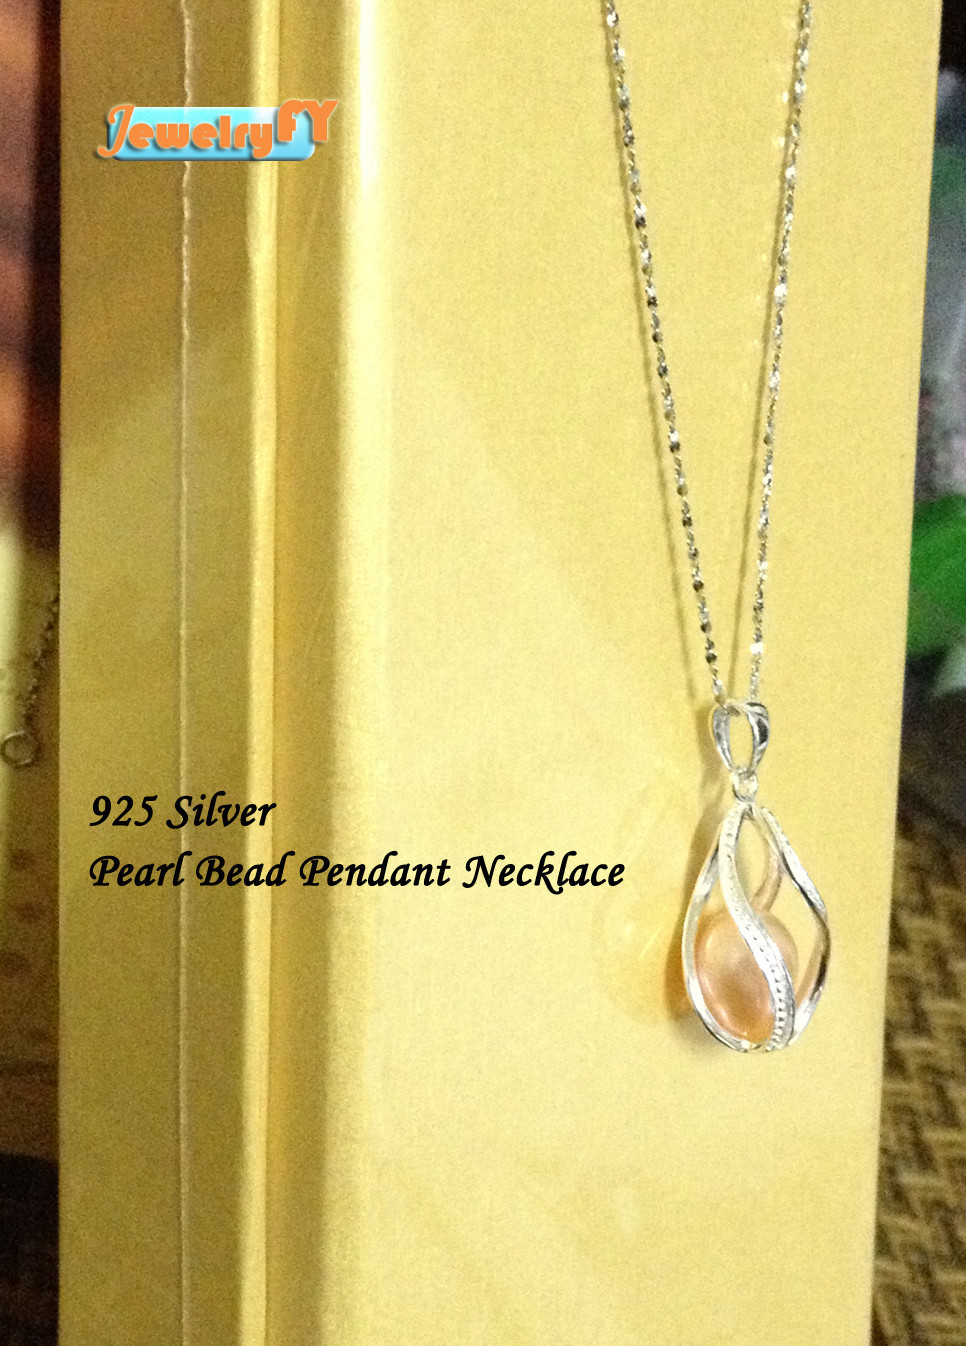 925 Silver Pearl Bead Pendant Necklace